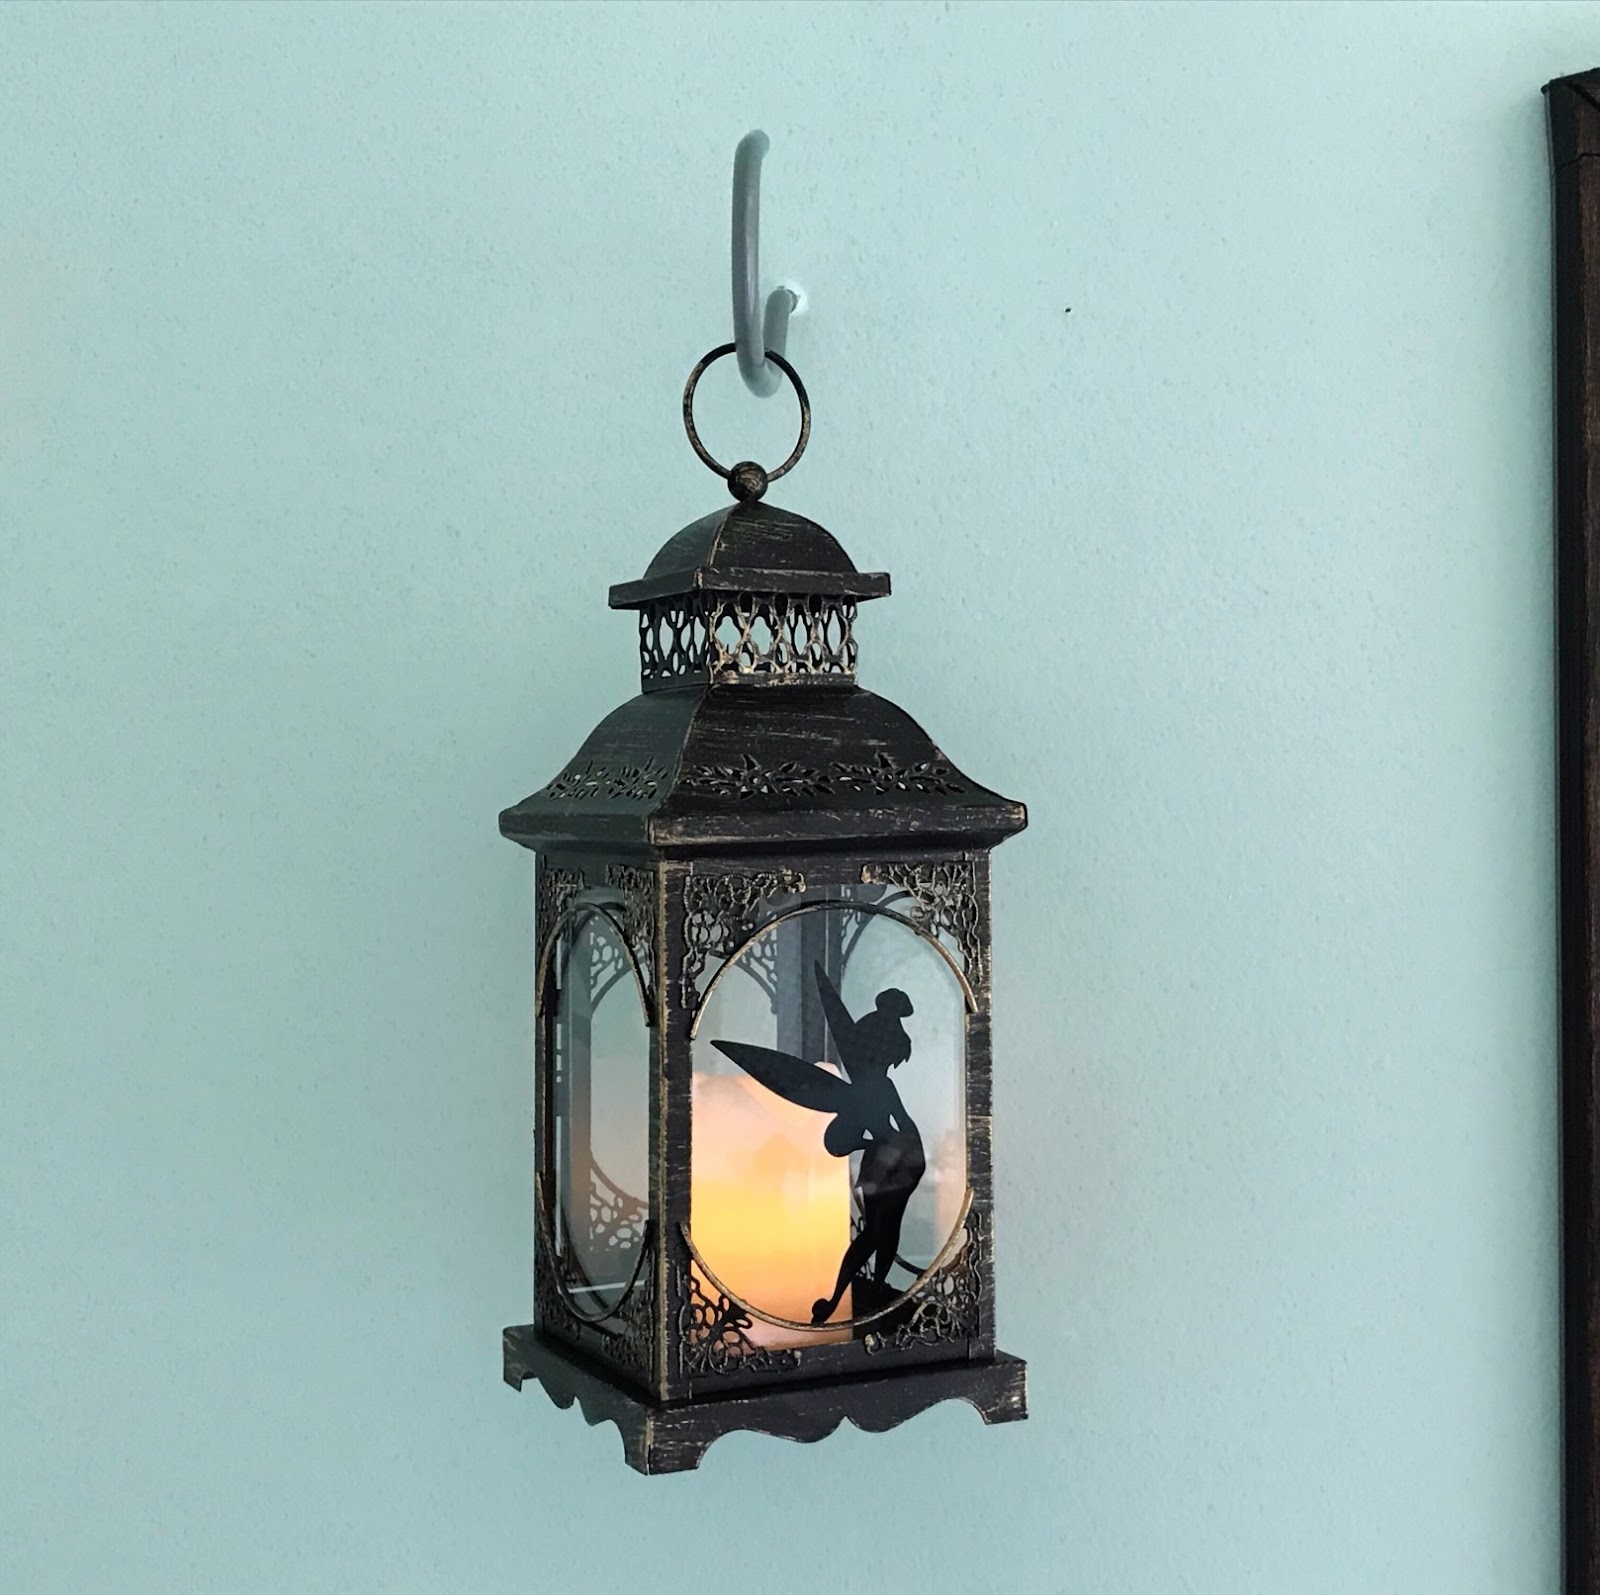 Customize just about anything using inspiration from this DIY Tinkerbell Lantern from Lawrence Made. See all the Best Crafts of 2018 from more of your favorite bloggers at Halfpint Design. 